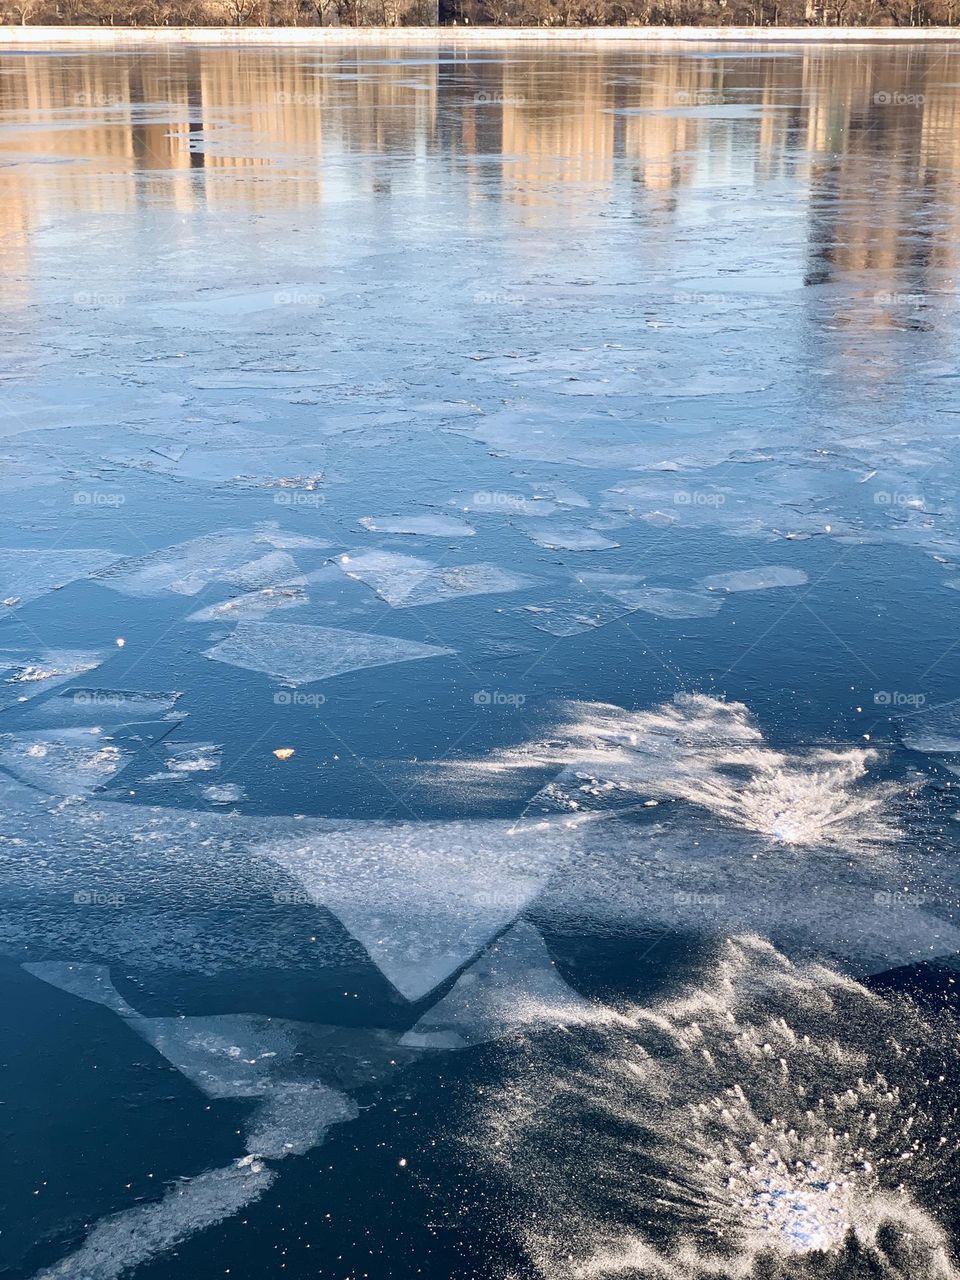 Snowflakes formed into triangular shaped on Jacqueline Kennedy Onassis Reservoir. 